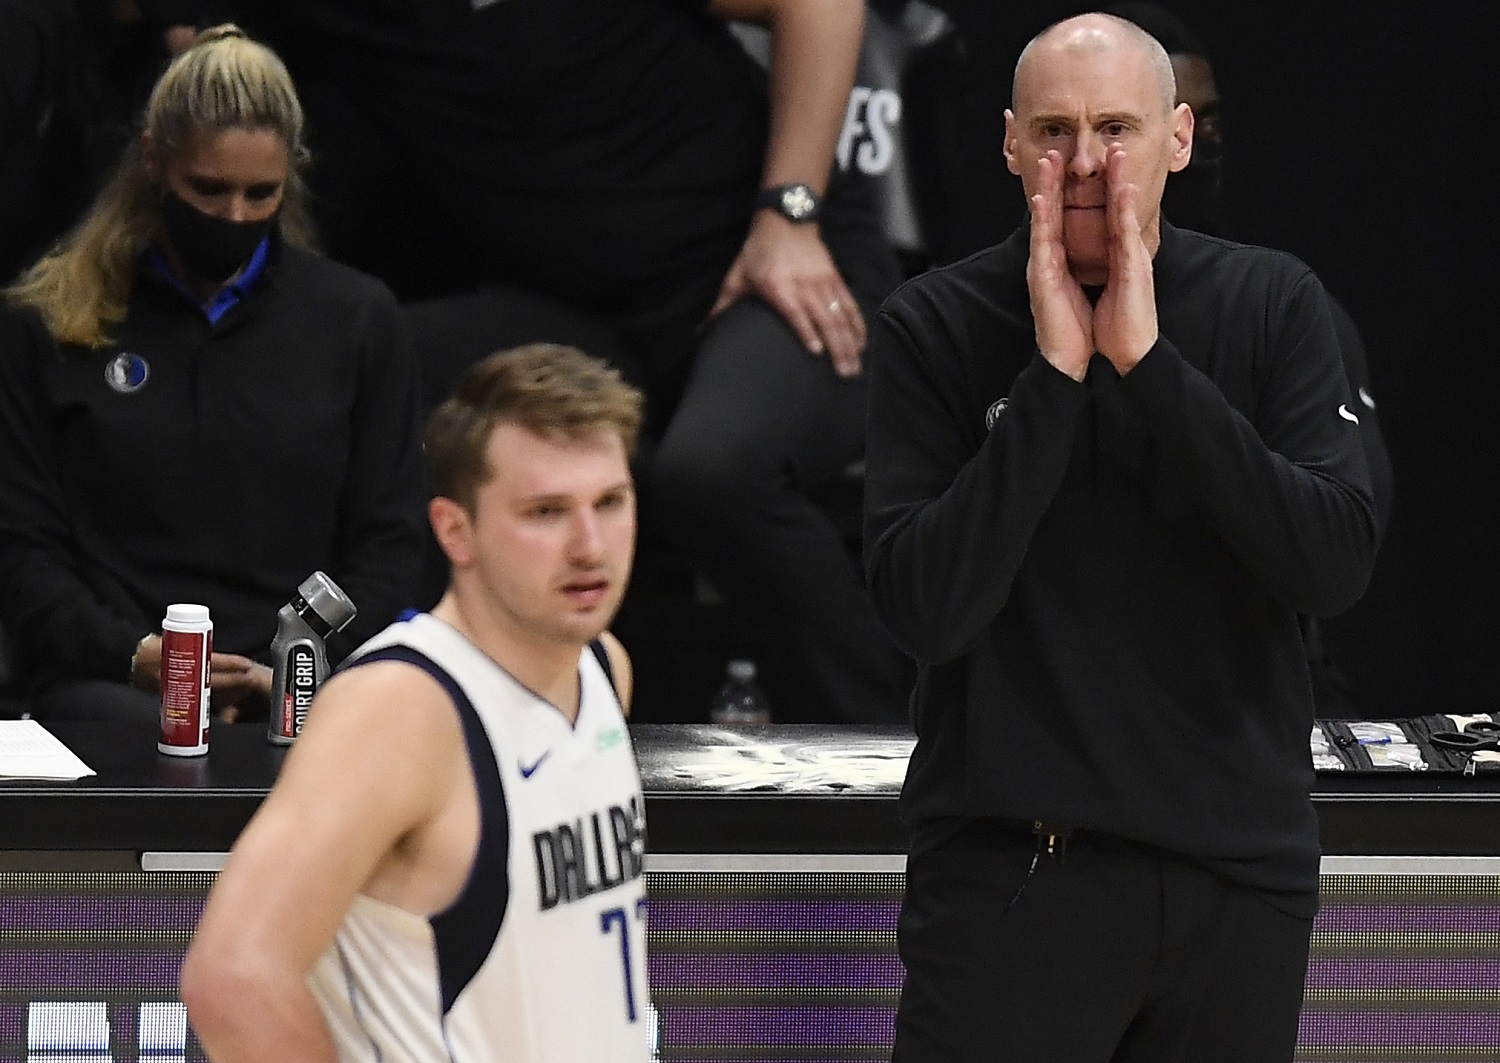 Star guard Luka Doncic and then-coach Rick Carlisle did not see eye to eye last season, and an ESPN analyst suggests teammates find Doncic difficult to play alongside. | Kevork Djansezian/Getty Images